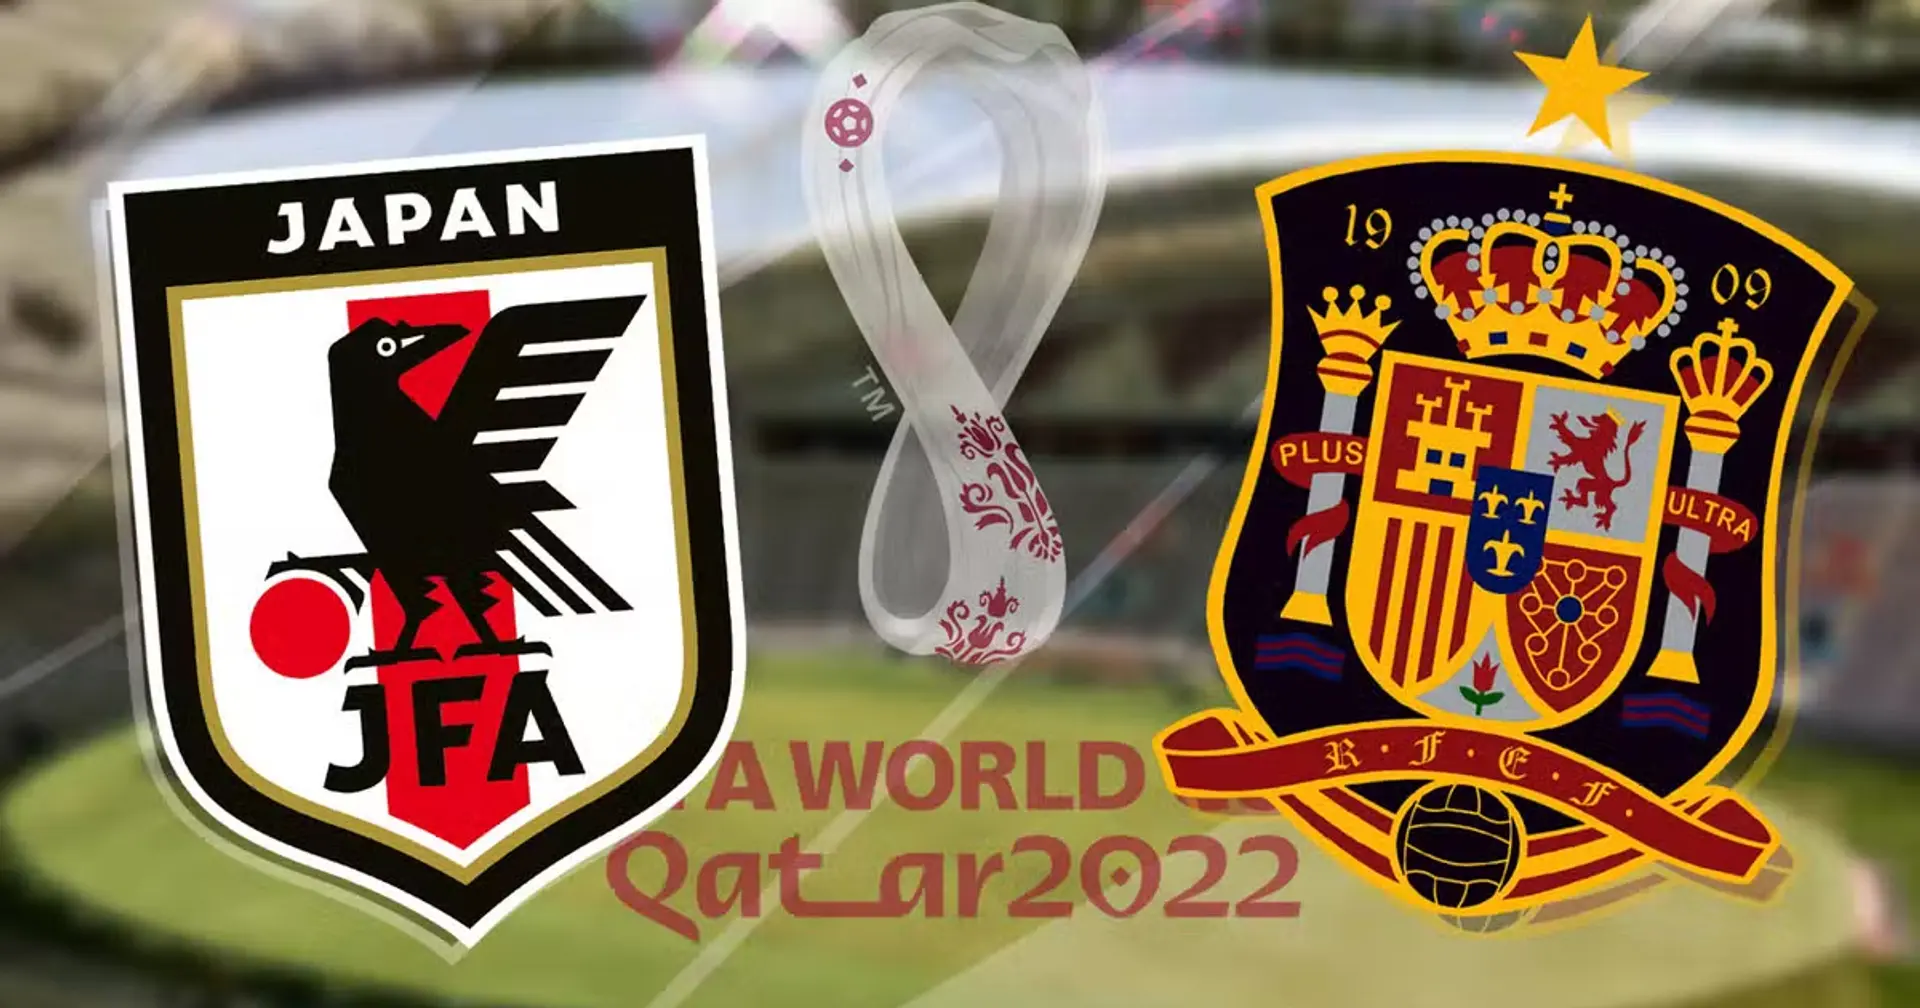 Japan vs Spain: Official team lineups for the World Cup clash revealed